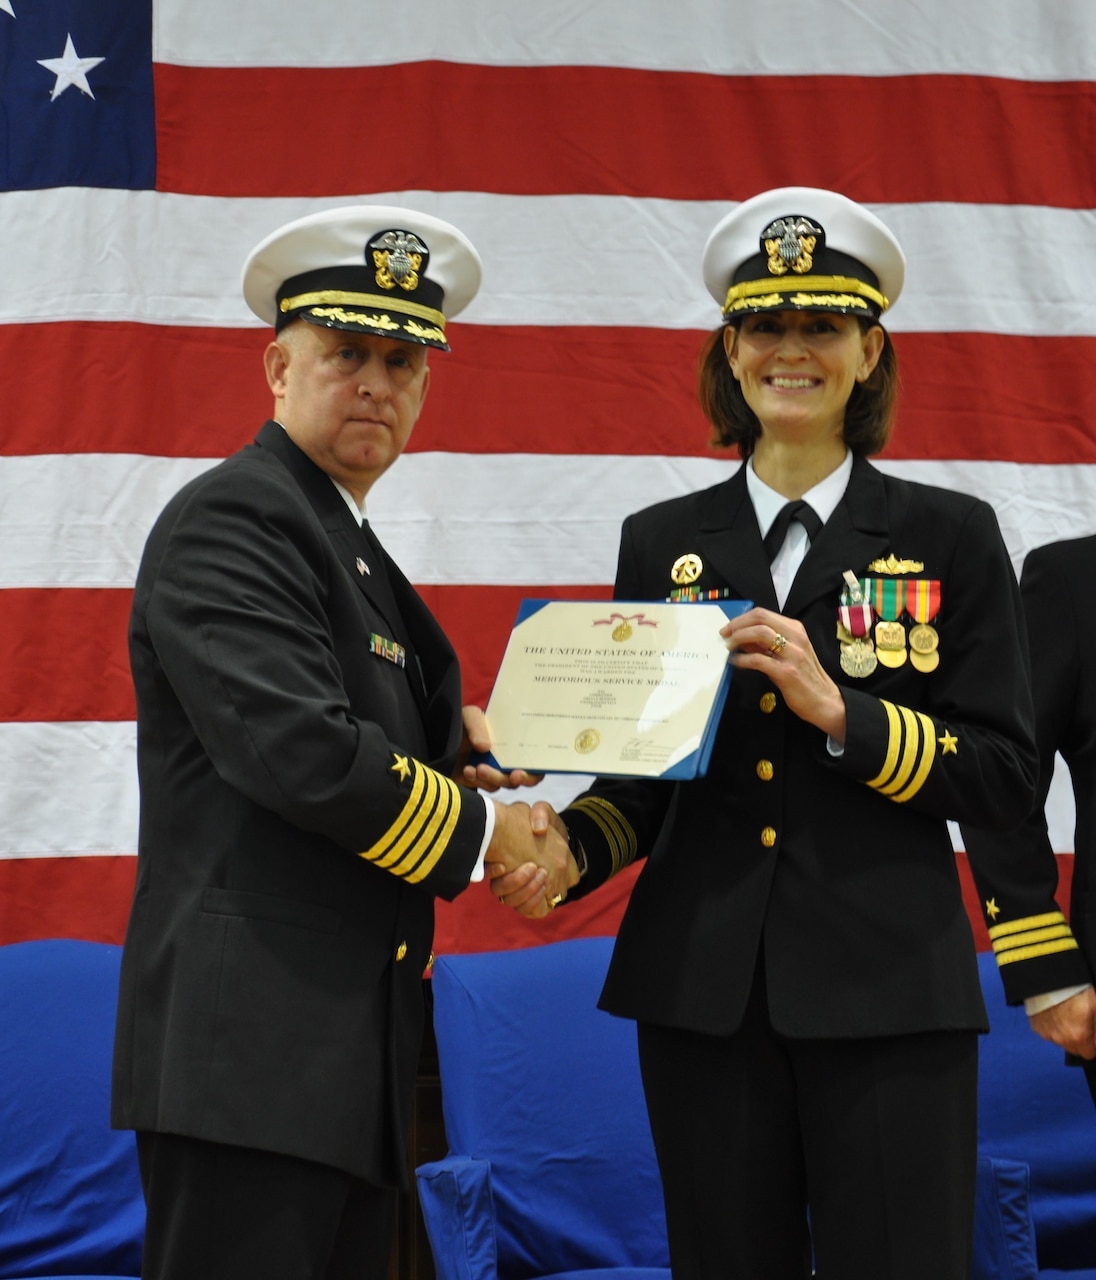 SASEBO, Japan (Dec. 12, 2019) Capt. Ed Thompson, deputy commander of Expeditionary Strike Group (ESG) 7, presents the Meritorious Service Medal to Cmdr. Greta Densham during the change of command ceremony for Naval Beach Unit (NBU) 7 onboard Commander, Fleet Activities Sasebo. Cmdr. Kirk Sowers relieved Densham as commanding officer. Under Densham’s leadership, the NBU 7 team completed eight forward-deployed naval forces (FDNF) deployments, 20 multi-lateral exercises, and two disaster relief efforts in the U.S. 7th Fleet area of responsibility. In November, the unit participated in Tiger Triumph, the first-ever tri-service exercise involving the U.S. Navy and Marine Corps and Indian Army, Navy and Air Force. NBU 7, part of Expeditionary Strike Group (ESG) 7, is operating in the Indo-Pacific region to enhance interoperability with partners and serve as a ready-response force for any type of contingency.